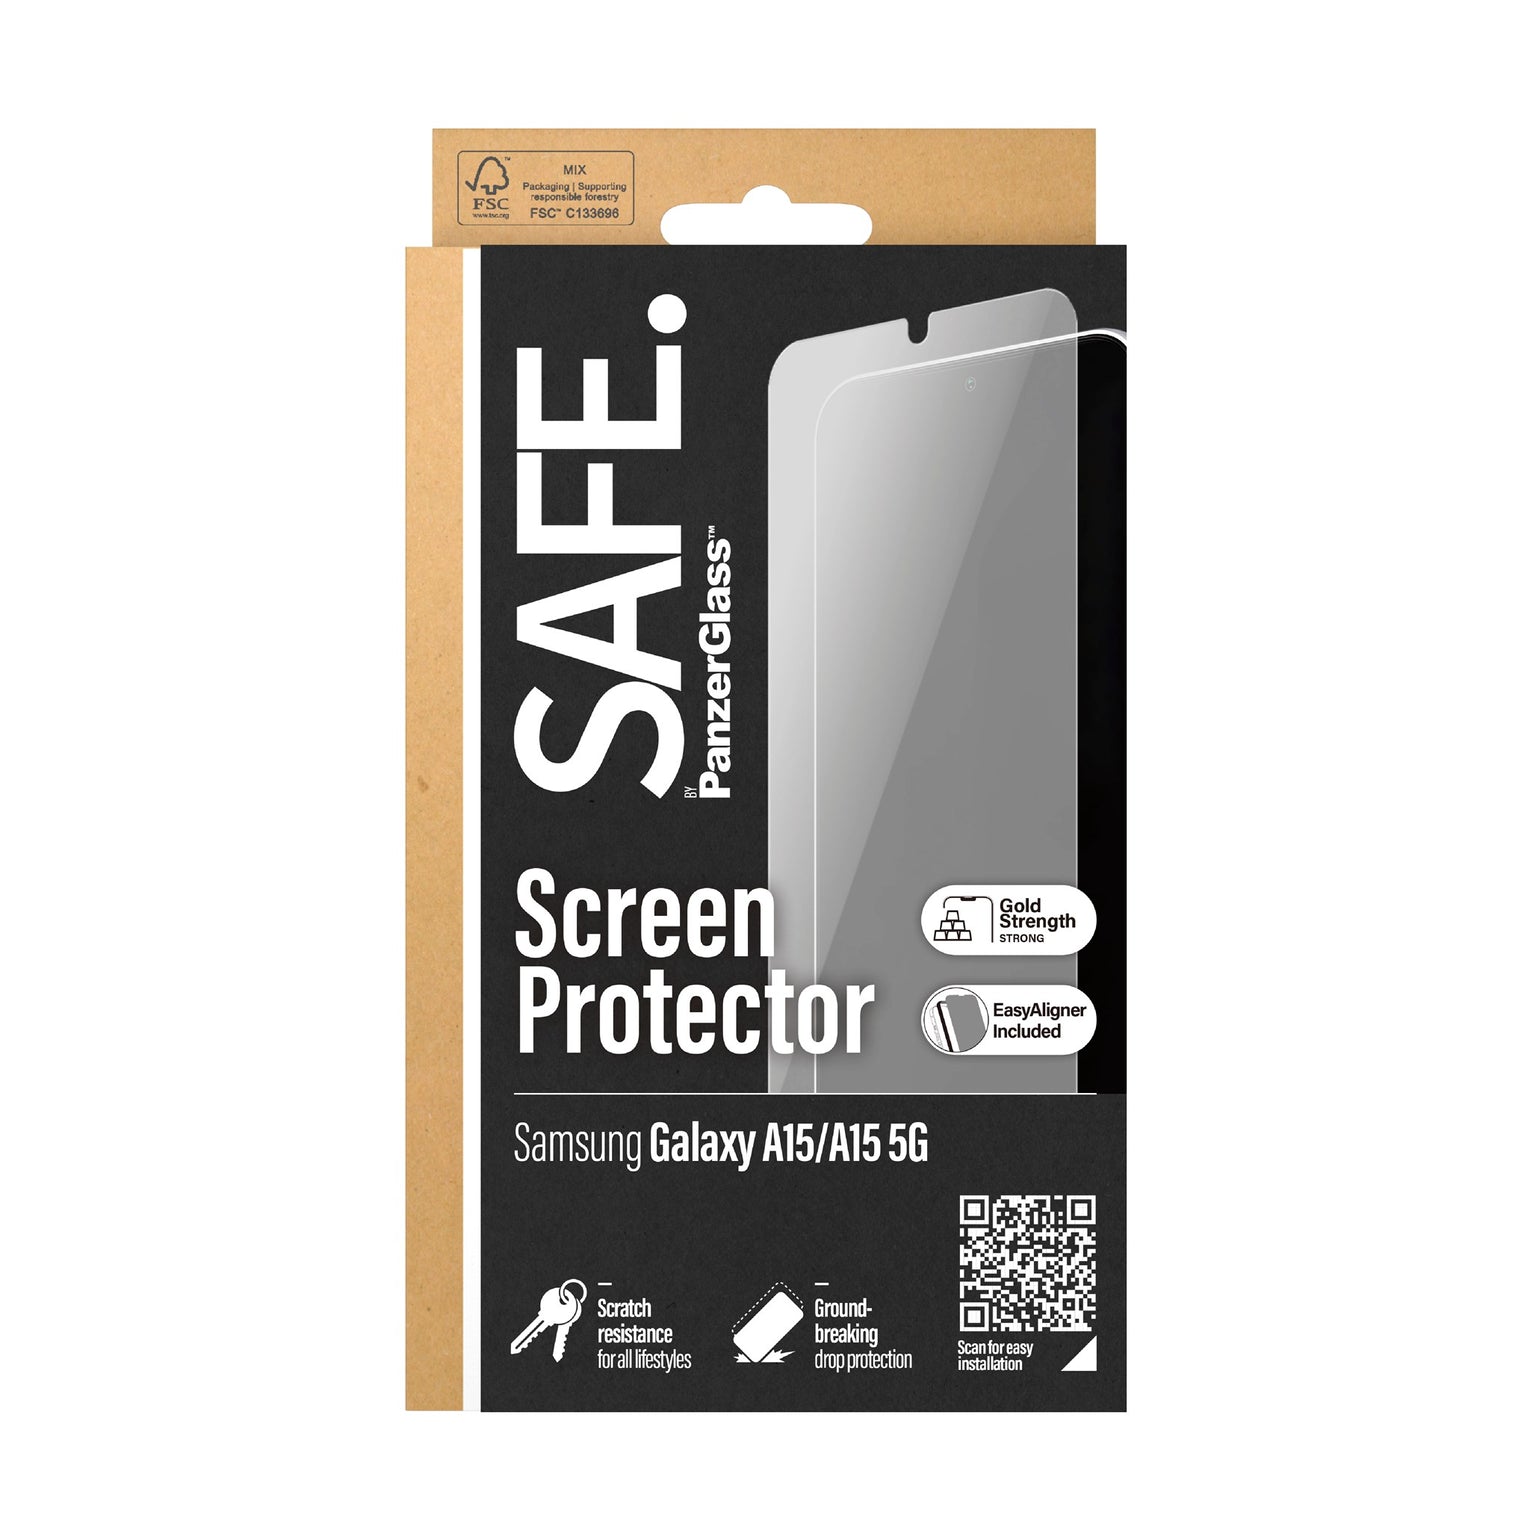 Samsung Galaxy A15 Screen Protector Ultra Wide Fit (with EasyAligner)